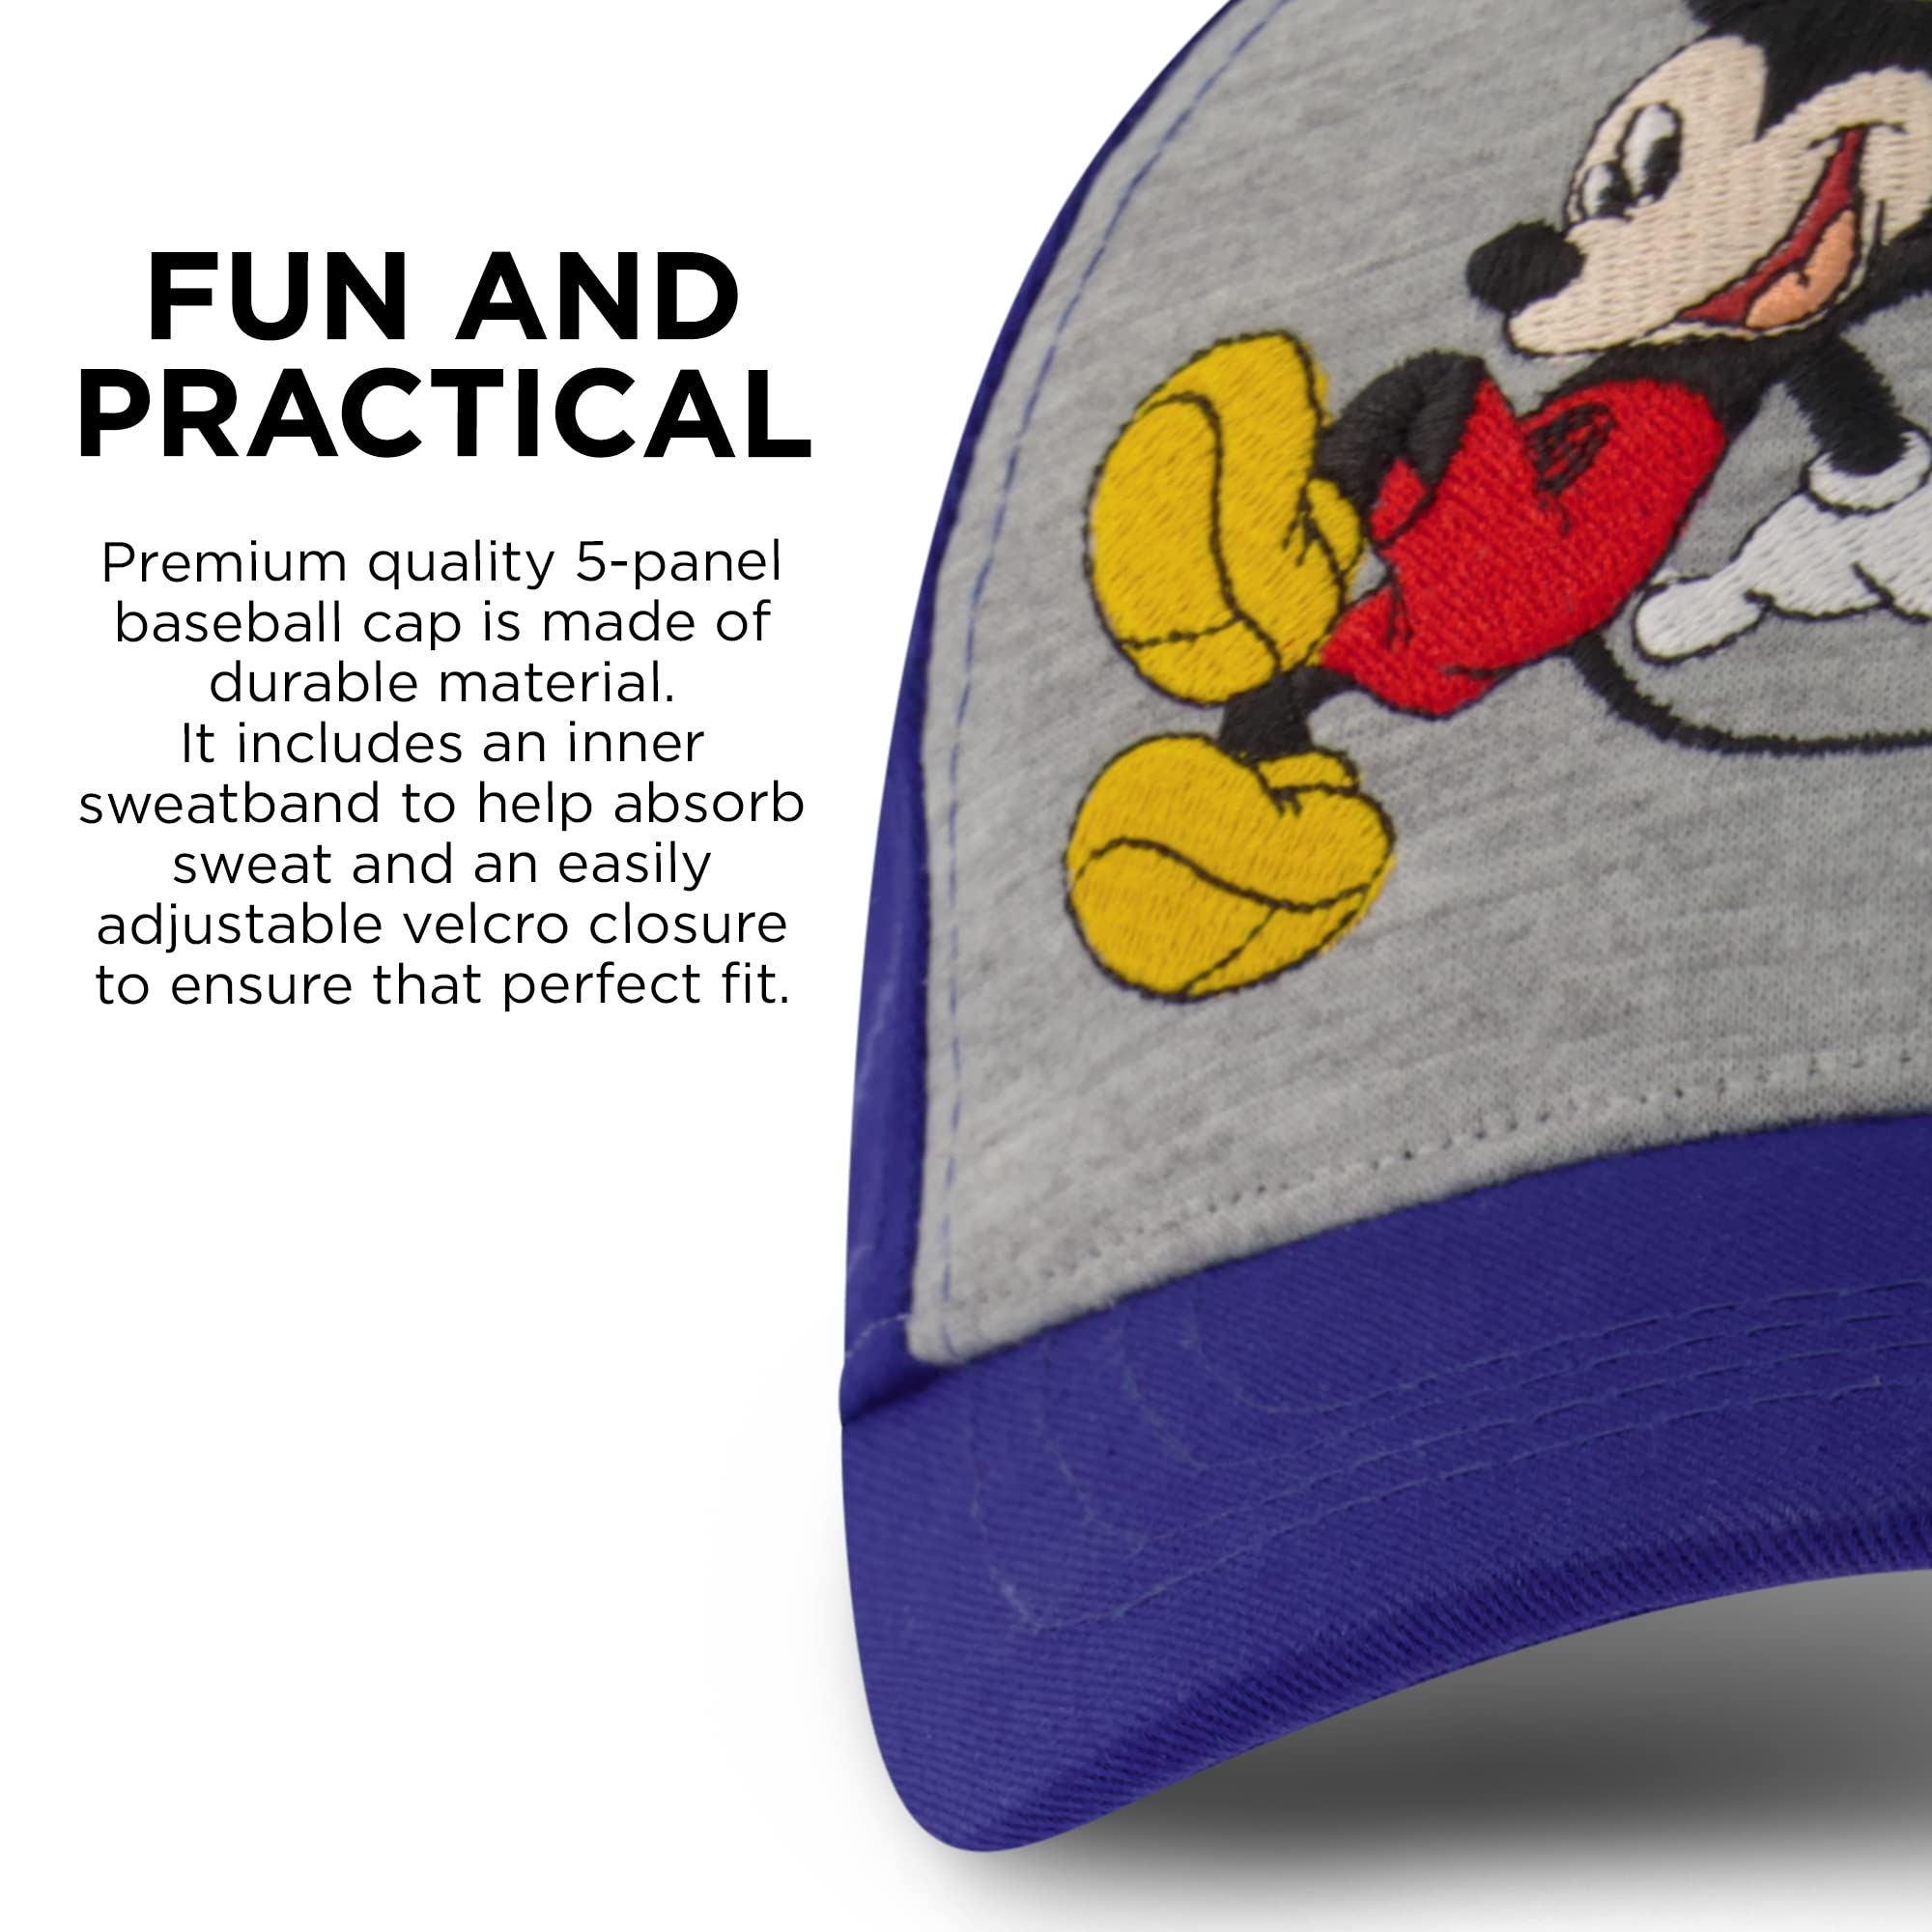 Disney Boys Baseball Cap, Mickey Mouse Adjustable Toddler Hat, Ages 2-4 Or Boy Hats for Kids Ages 4-7